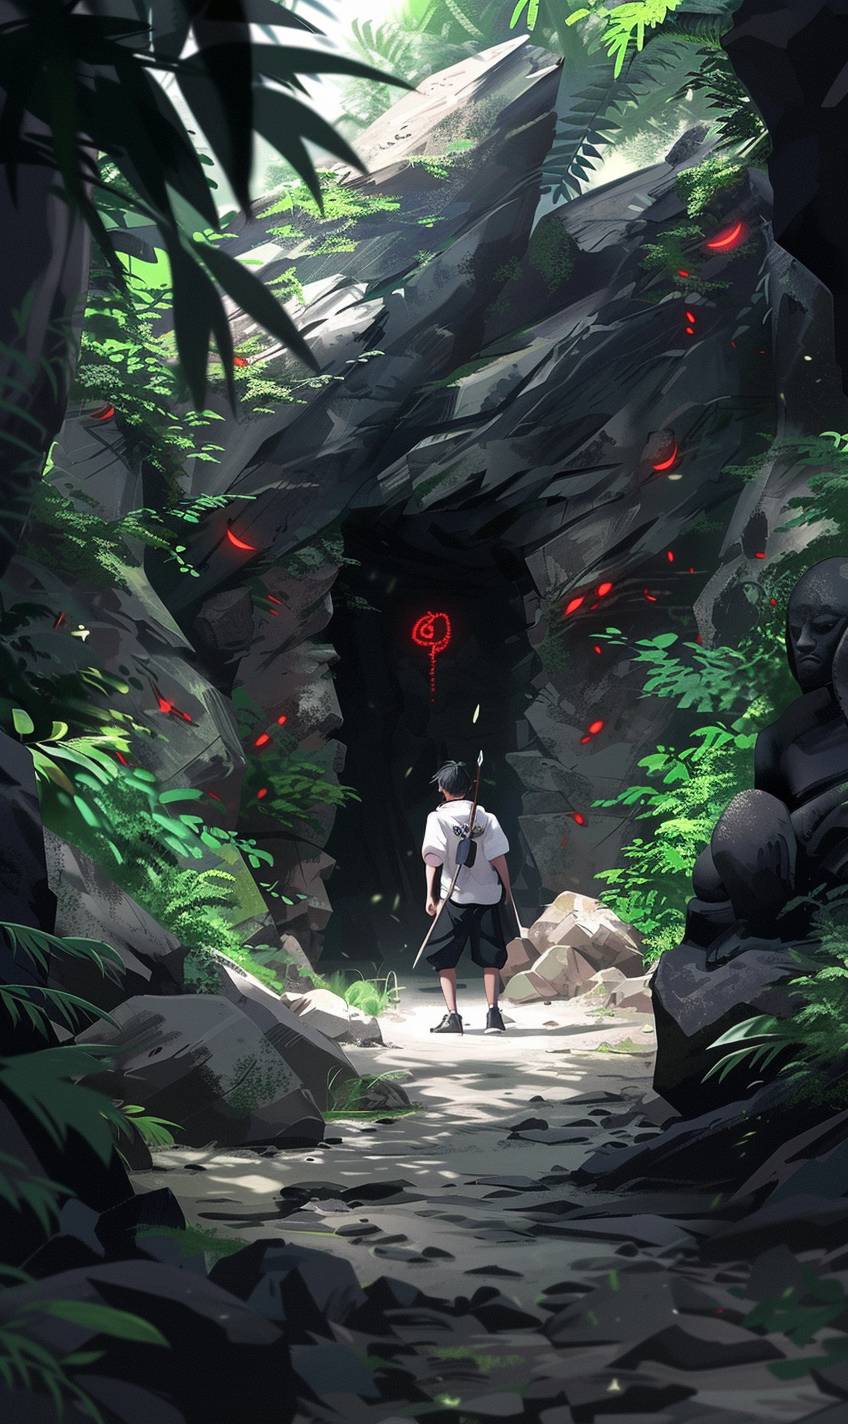 A mysterious explorer discovering an ancient, hidden temple deep in a dense jungle, with glowing runes and mythical creatures guarding the entrance